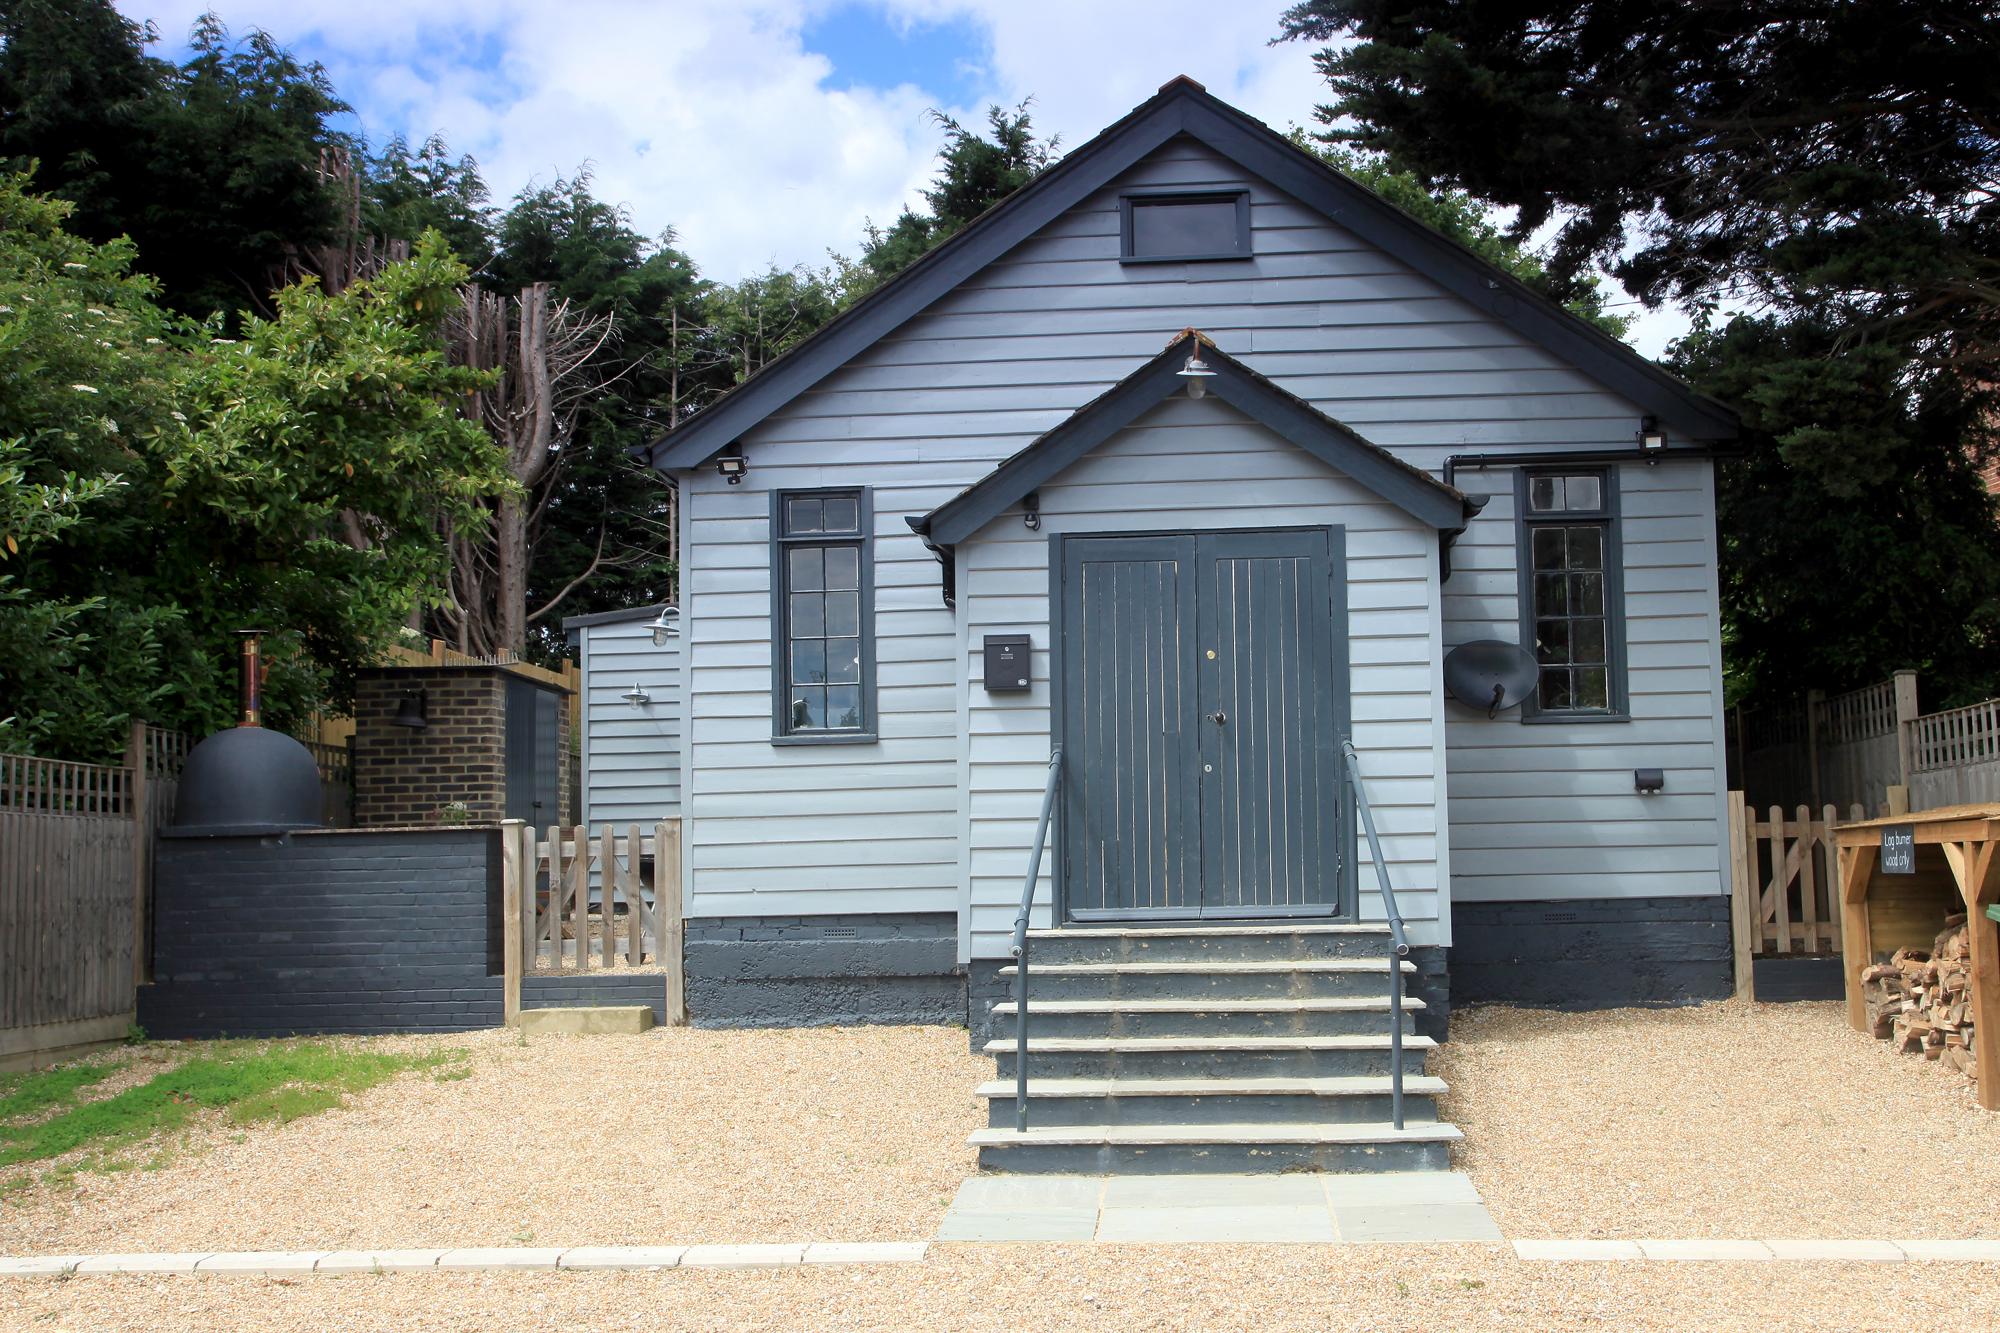 Self-Catering in Kent holidays at Cool Places